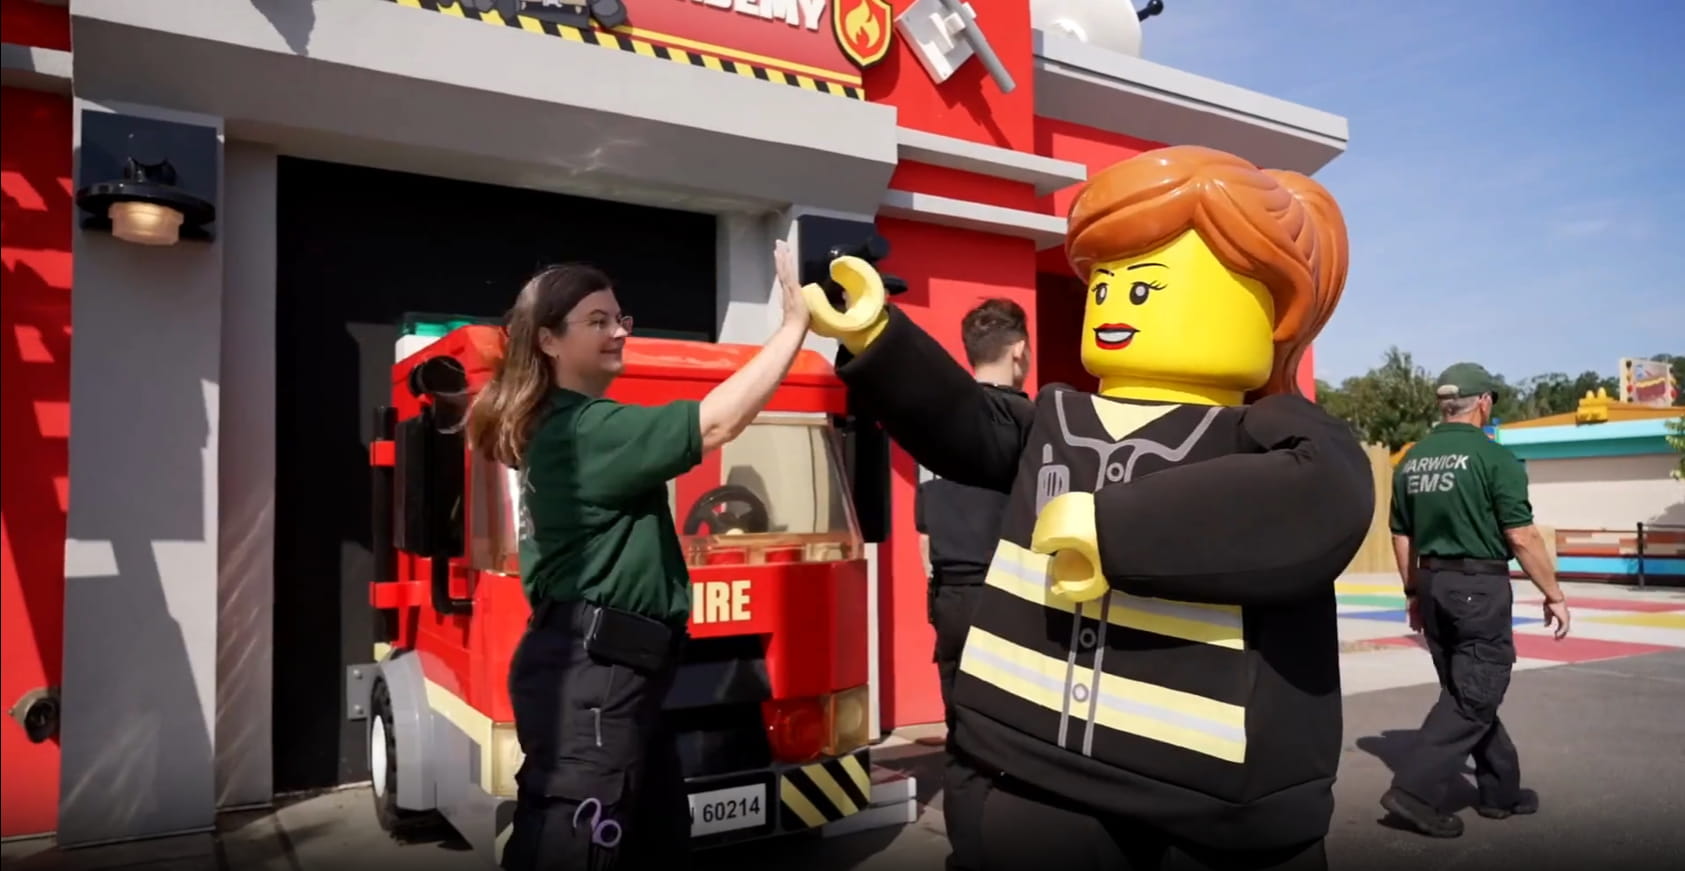 FREE admission to LEGOLAND New York for First Responders 2023